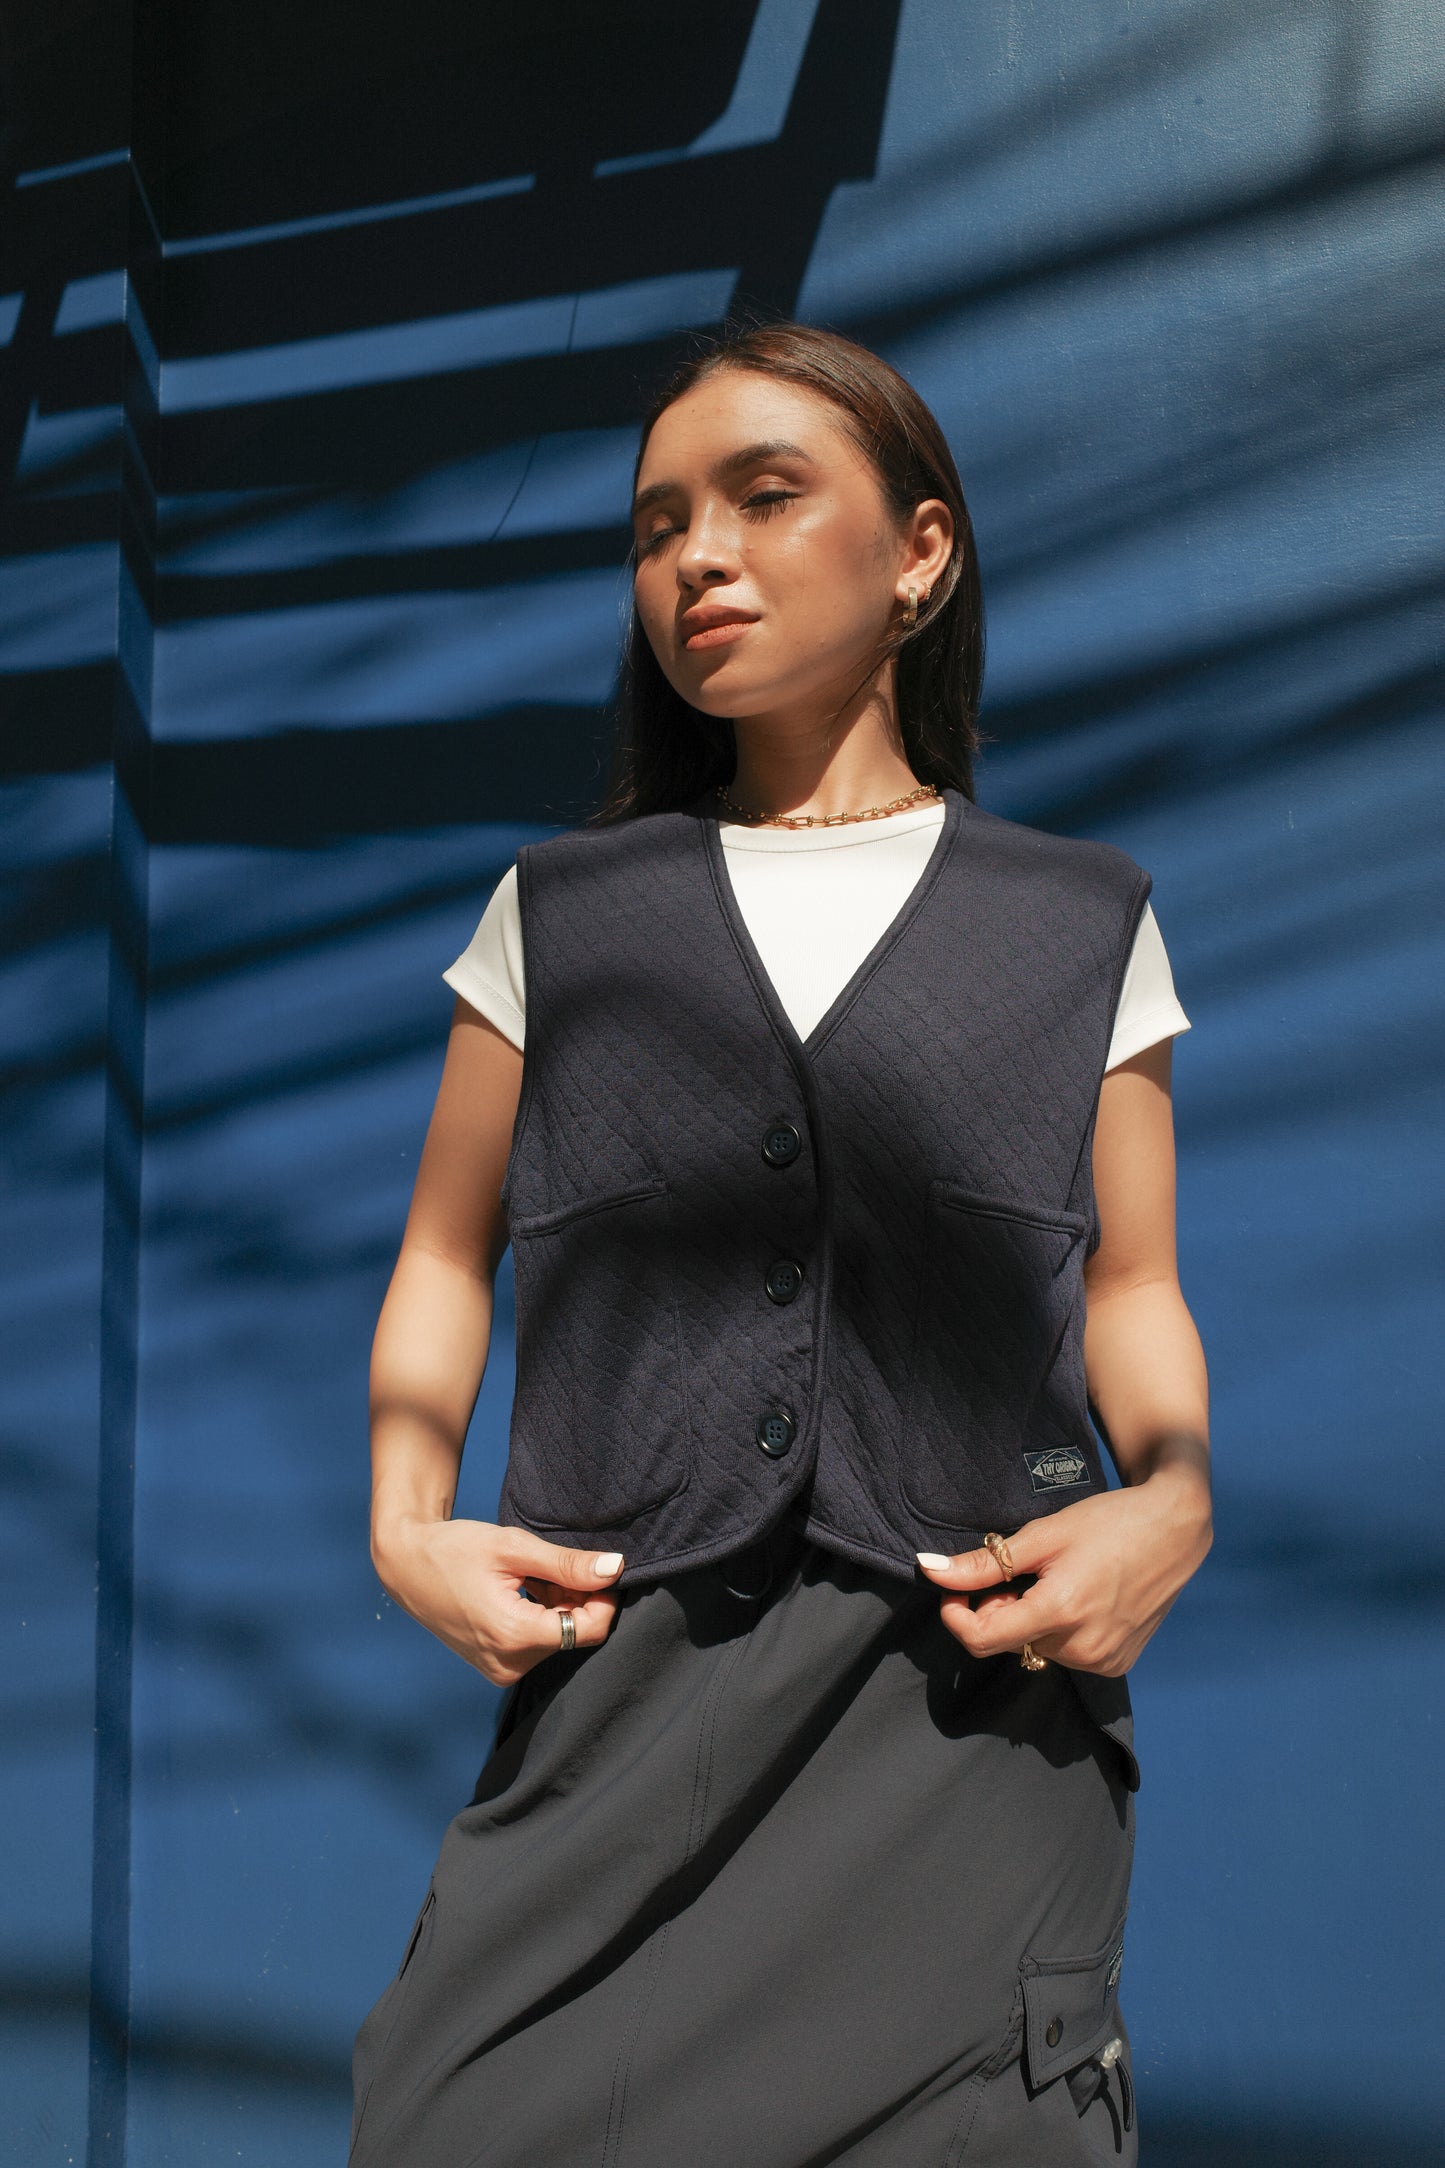 Cropped Quilted Vest (Navy Blue)